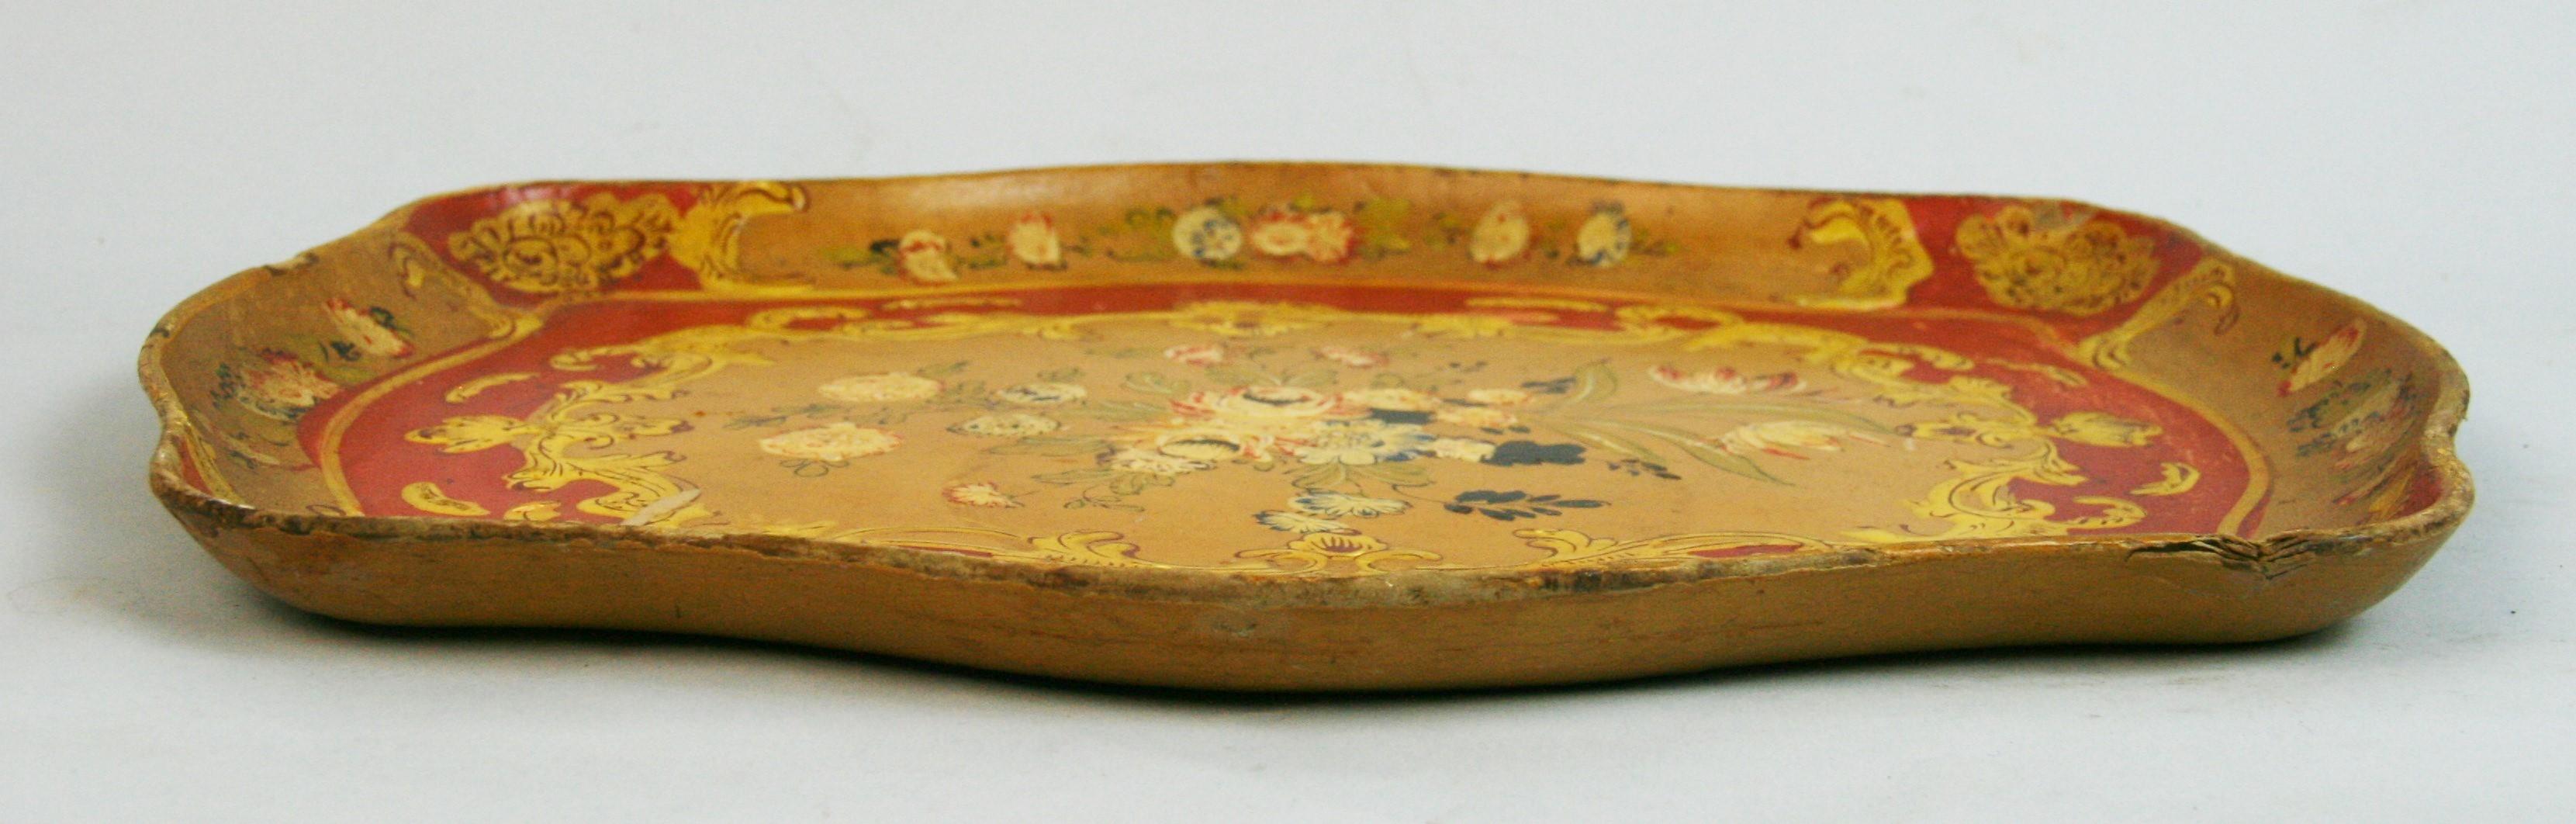 Japanese Serving Tray Hand Painted Floral Design Pressed Wood, 1950's For Sale 2